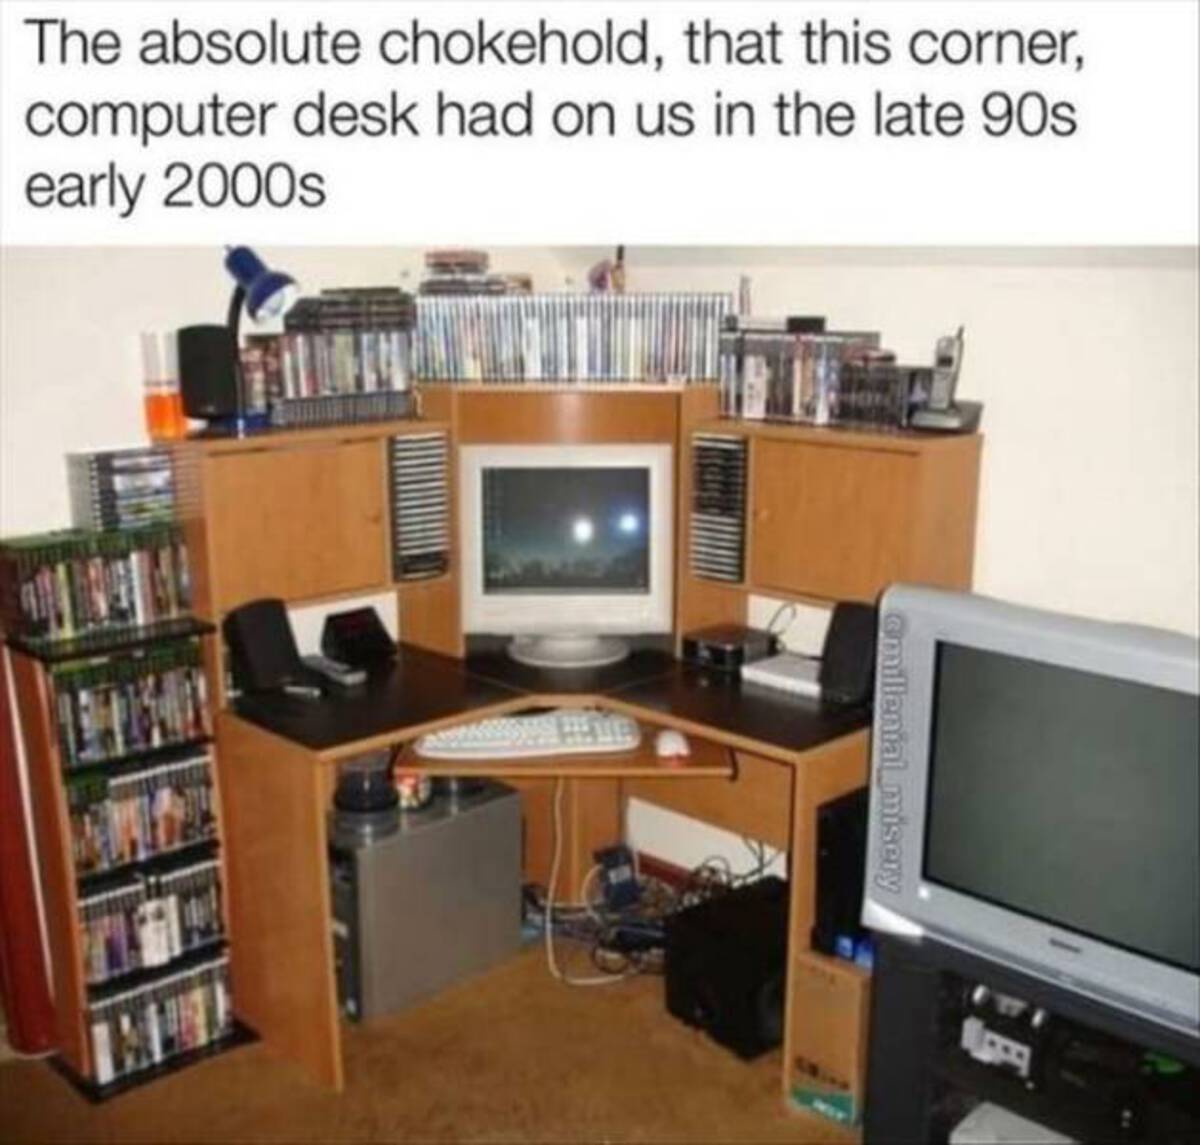 90s corner desk - The absolute chokehold, that this corner, computer desk had on us in the late 90s. early 2000s Gmillenial misery